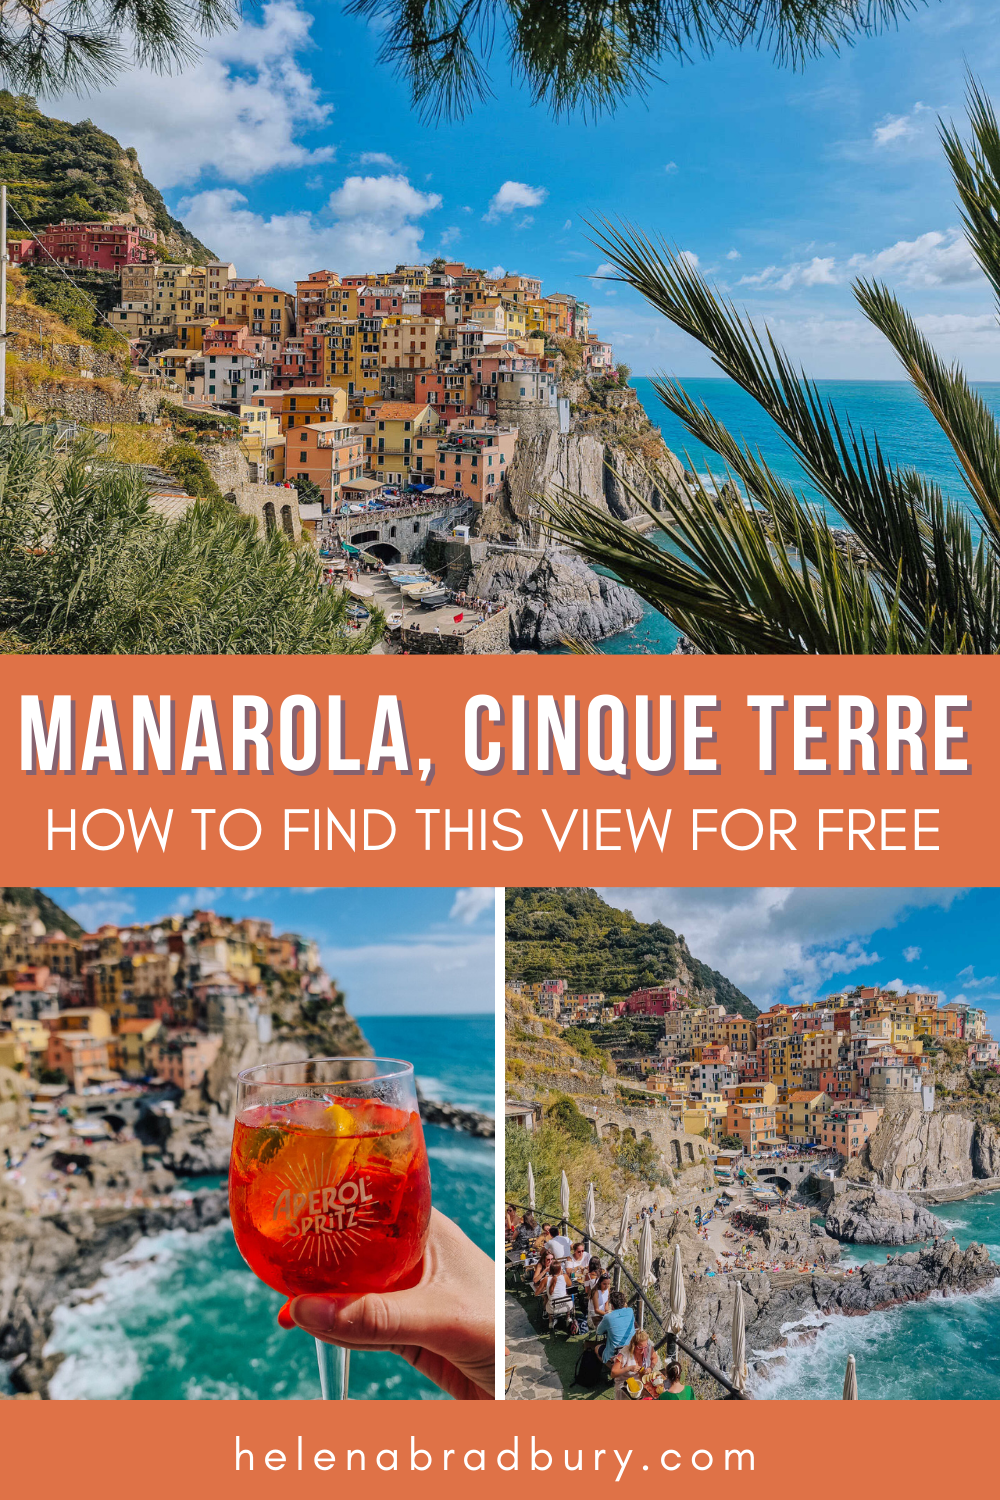 Skip the famous Cinque Terre Manarola restaurant, Nessun Dorma, and find the same viewpoint of Manarola for free, without needing reservations | nessun dorma cinque terre || best photo spots in cinque terre | best things to do in cinque terre | cinqu